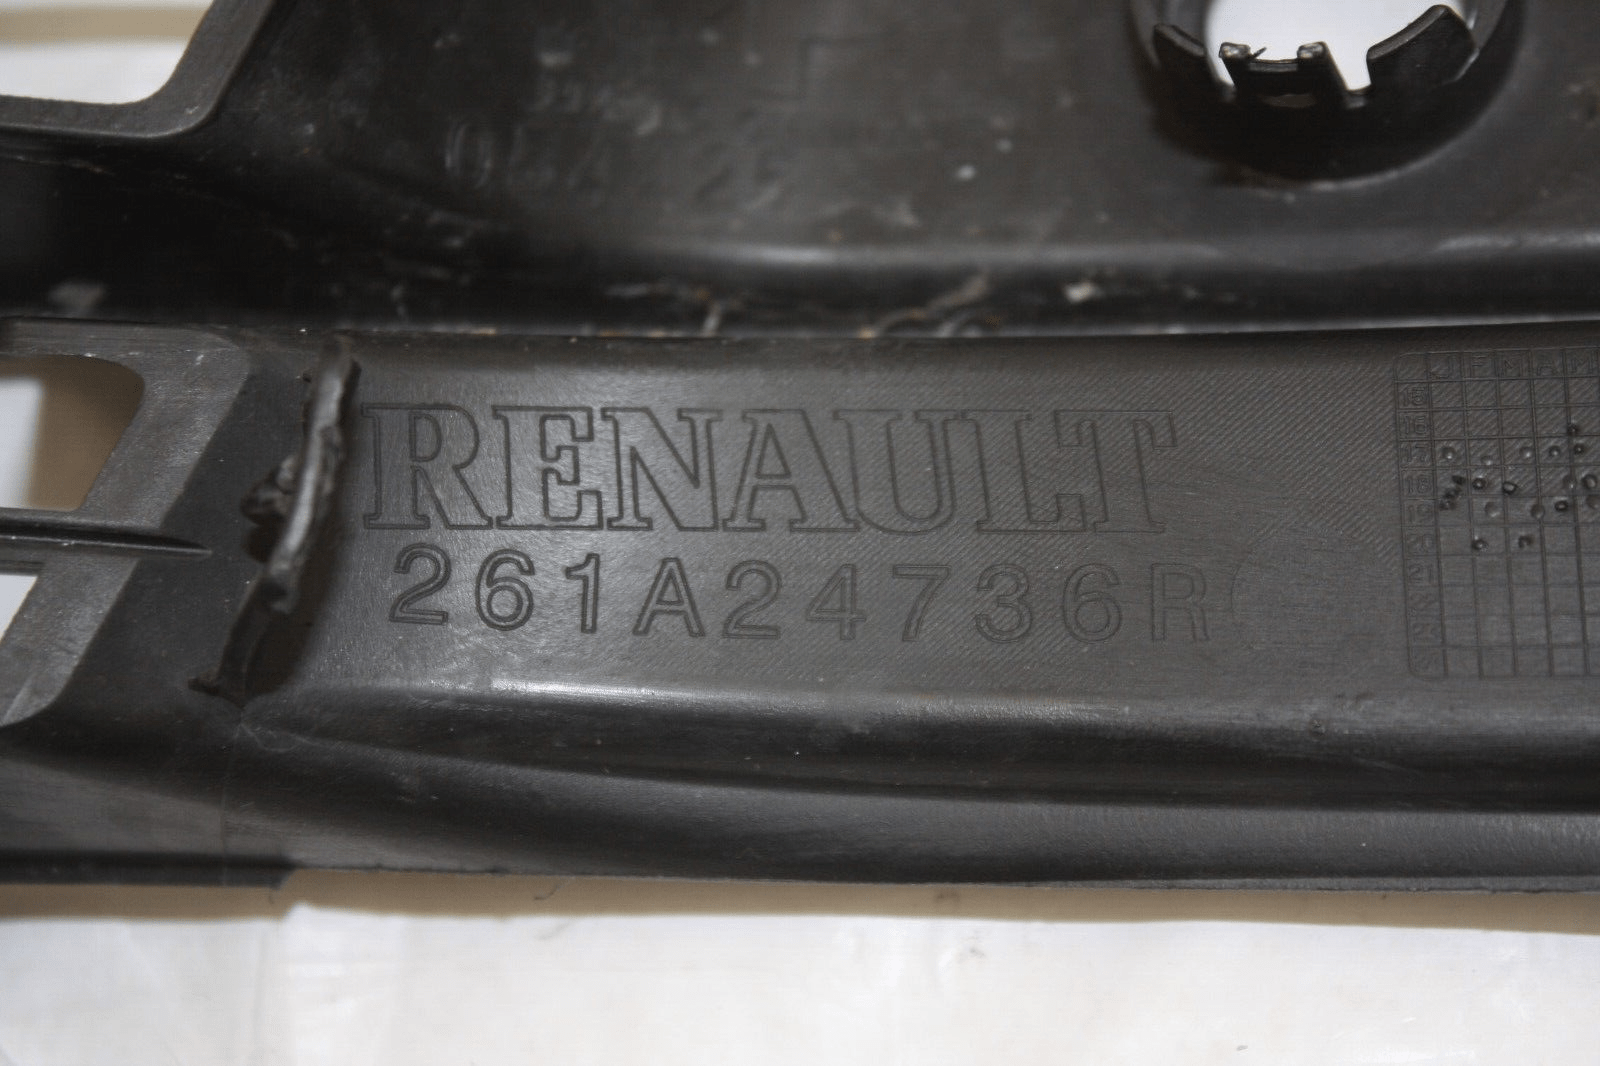 Renault-Captur-Front-Bumper-Right-Grill-2017-to-2020-261A24736R-Genuine-176268314530-9